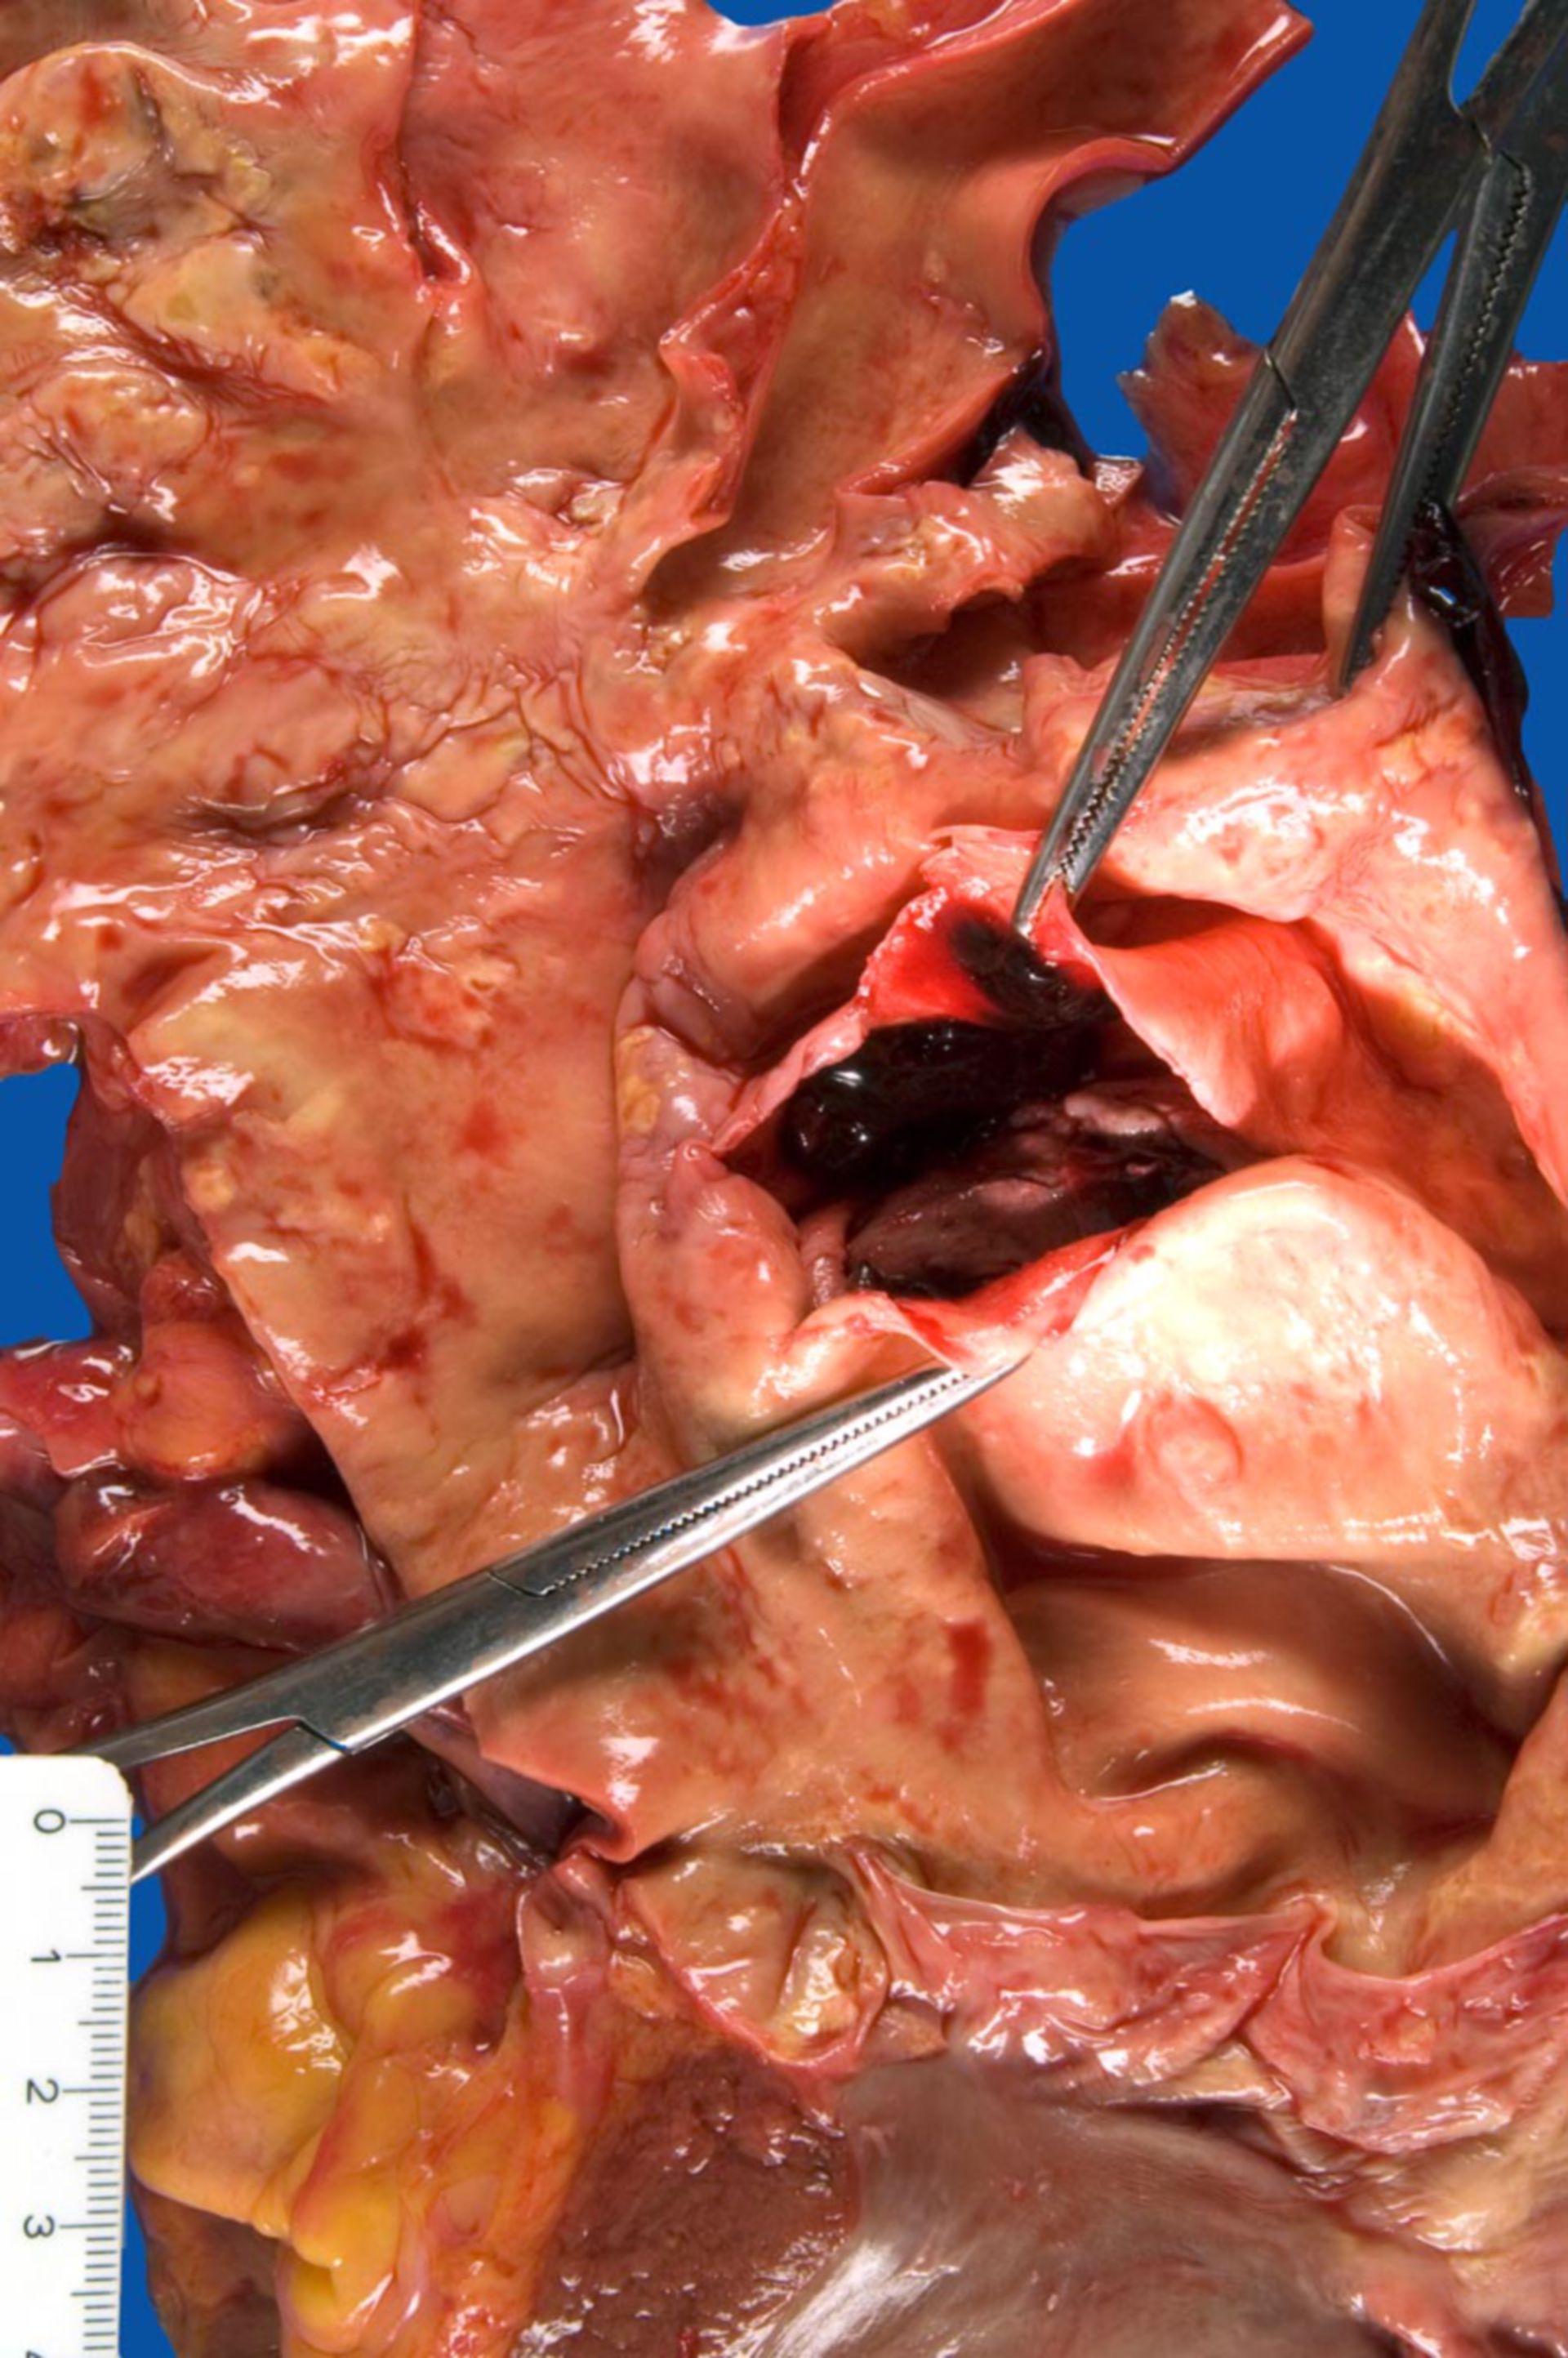 Acute rupture of a dissecting aneurysm of the aorta